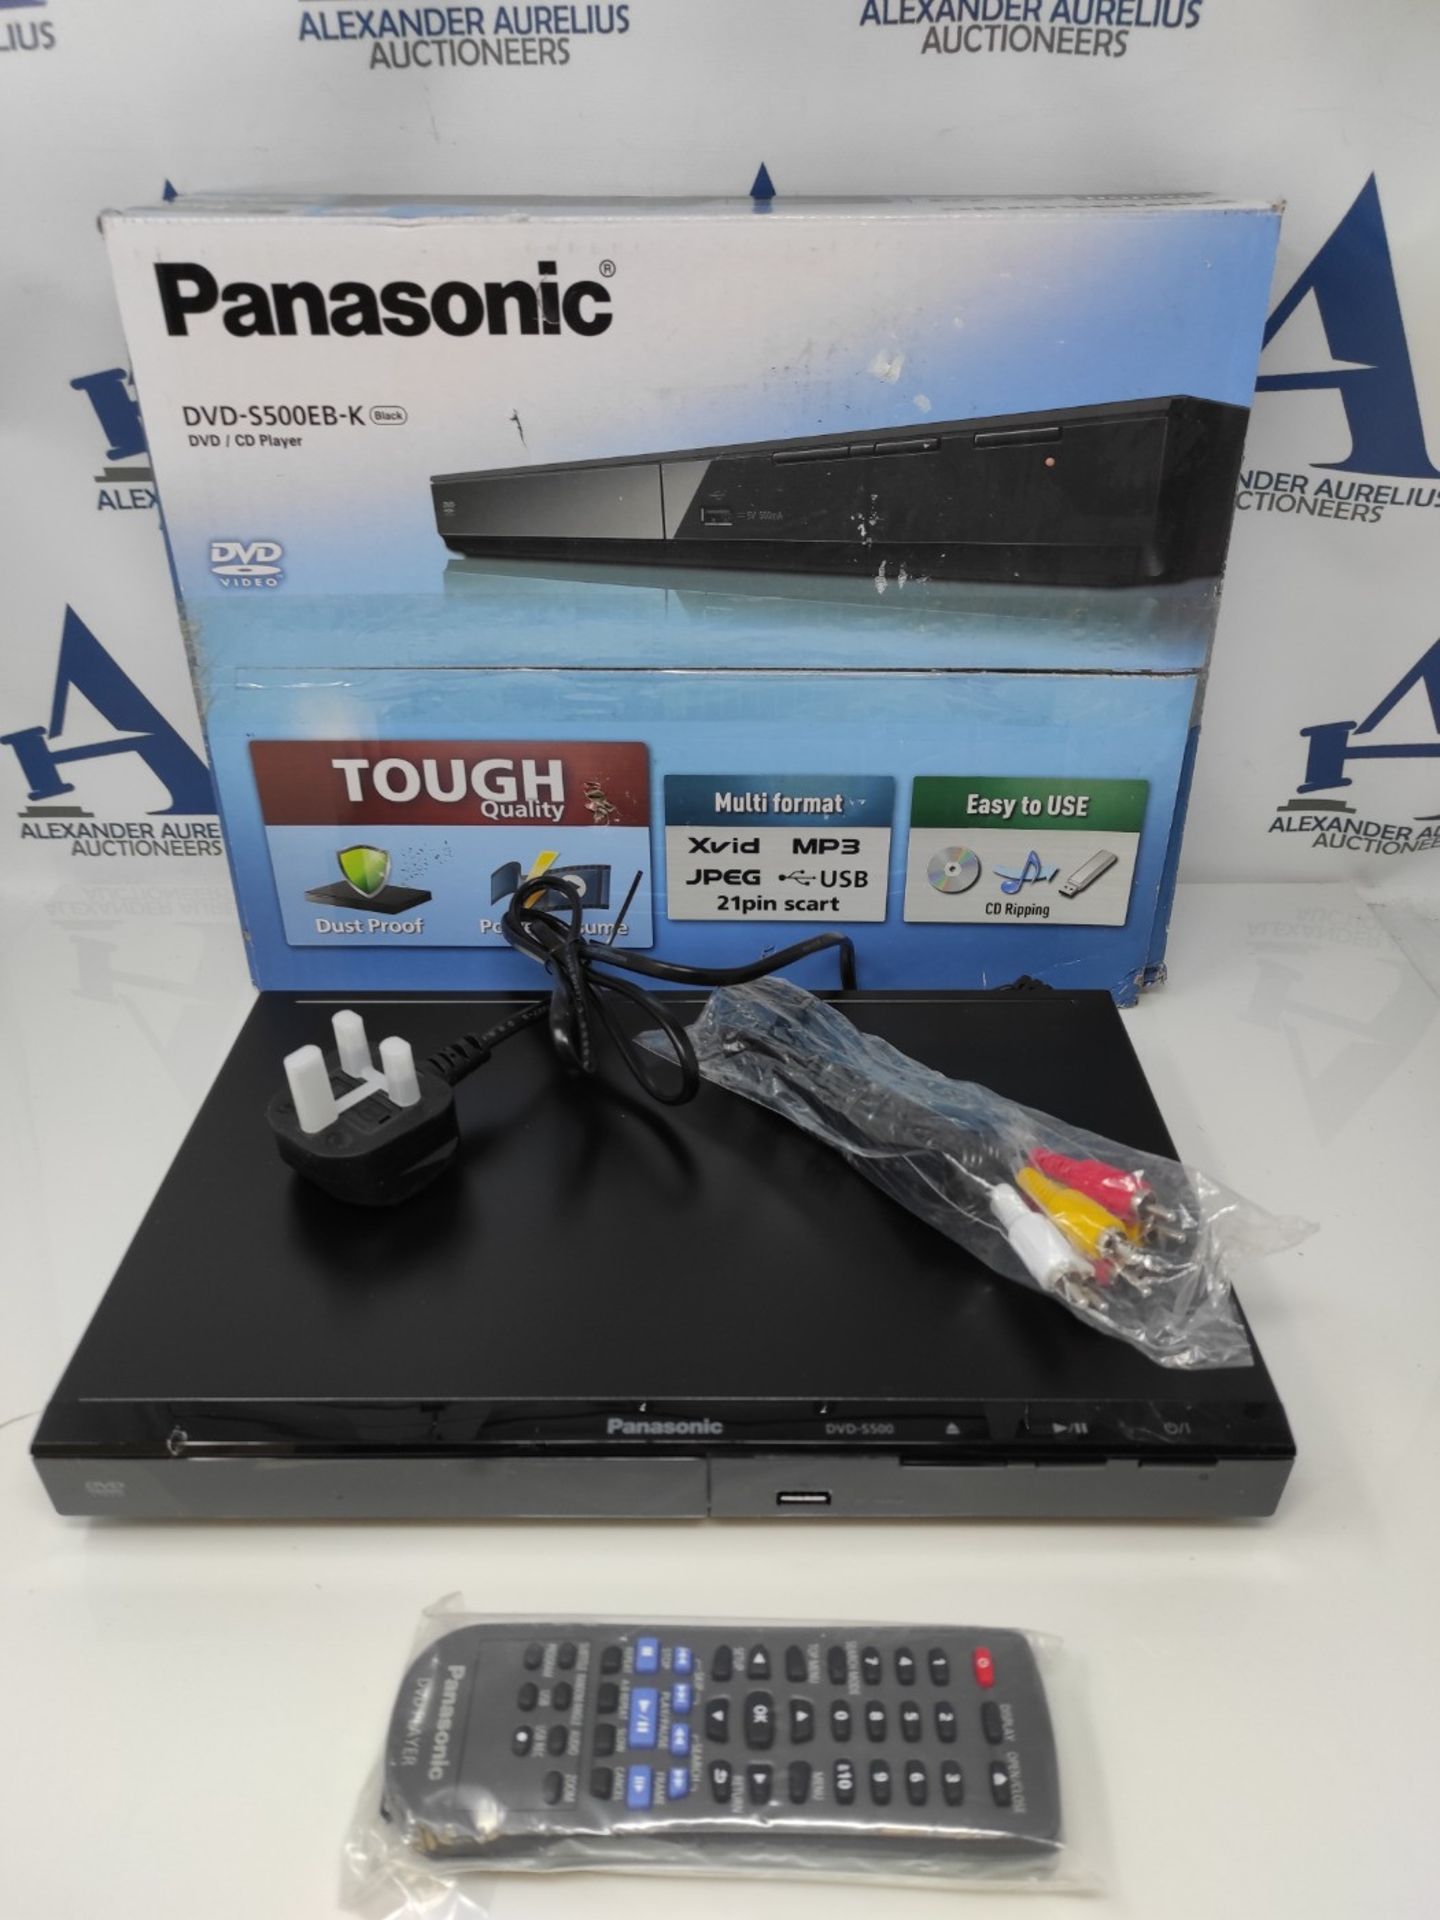 Panasonic DVD-S500EB-K DVD Player with Multi Format Playback - Image 2 of 2